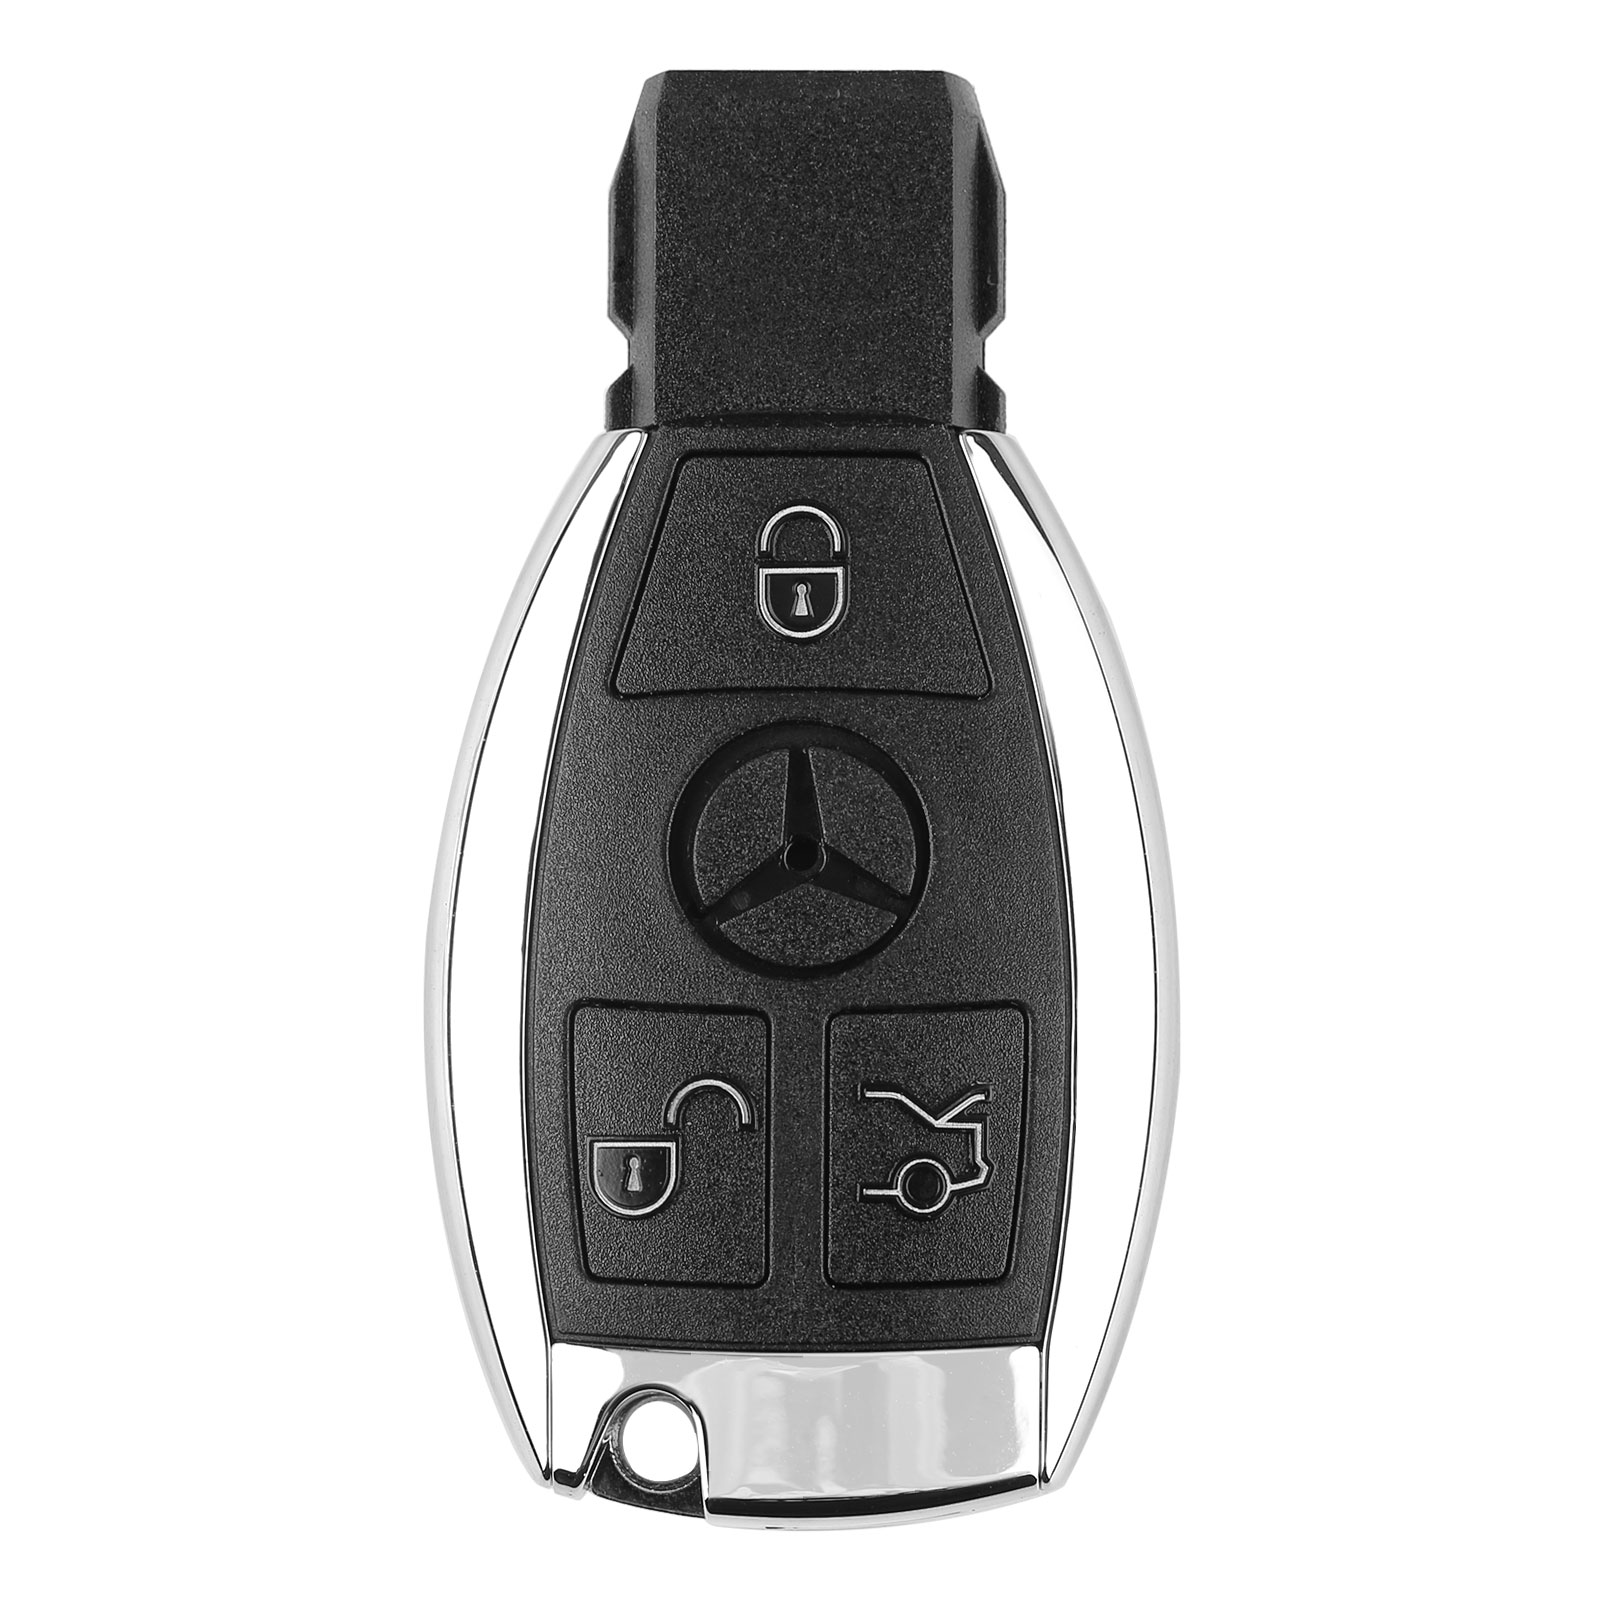 CG MB 08 Version Keyless Go Key 2-in-1 315MHz/433MHz with Shell for Mercedes  W164 W221 W216